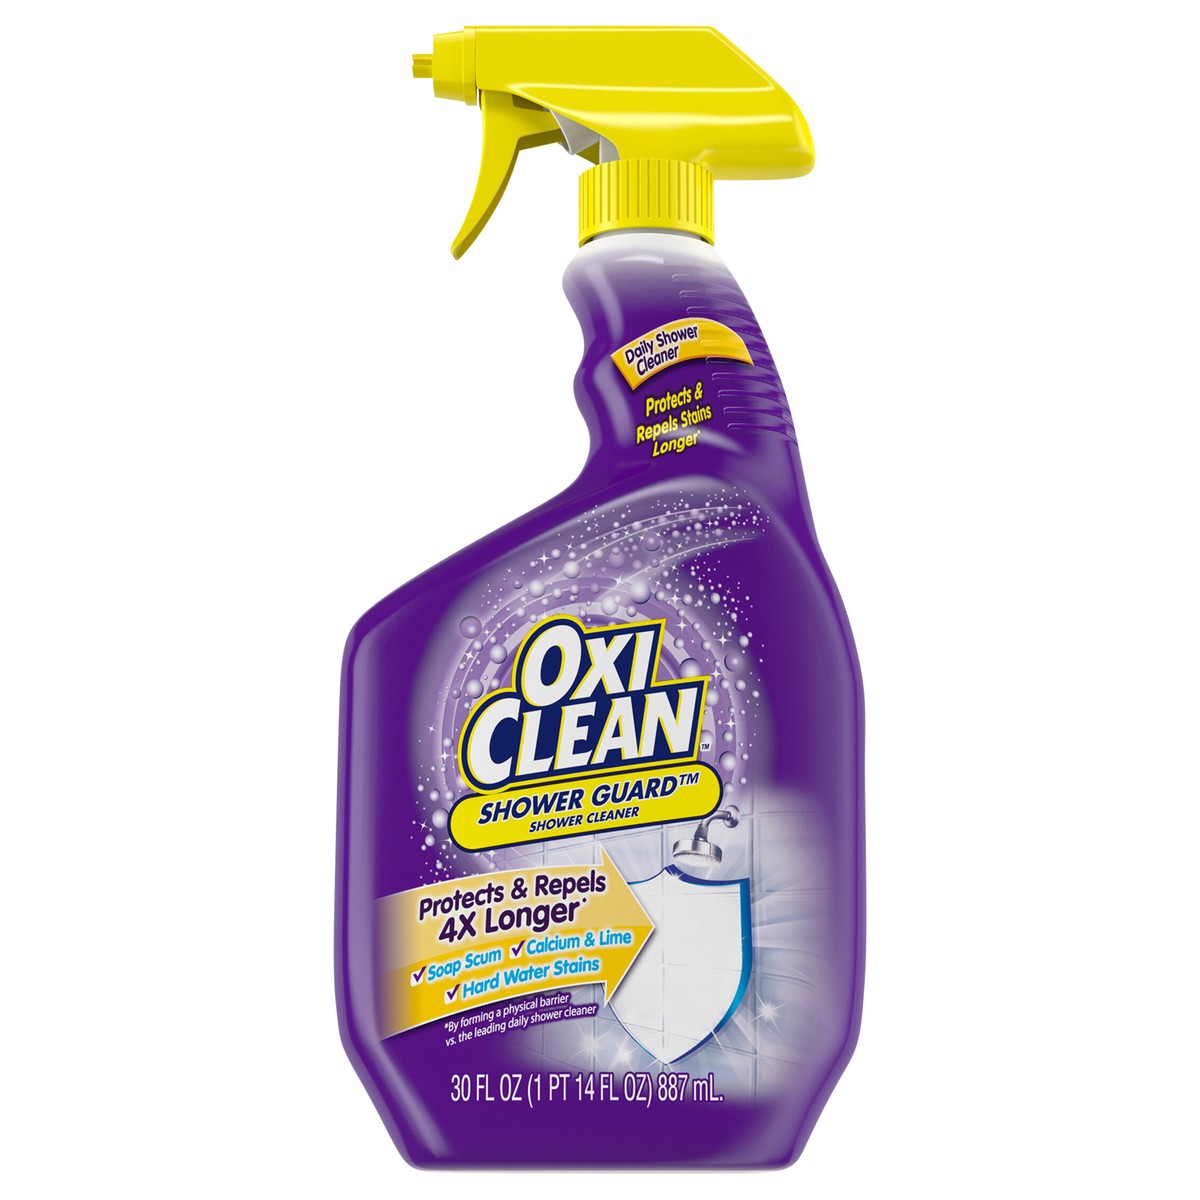 slide 1 of 3, Oxi-Clean Shower Guard Daily Shower Cleaner, 30?oz., Protects & Repels Stains, 30 fl oz